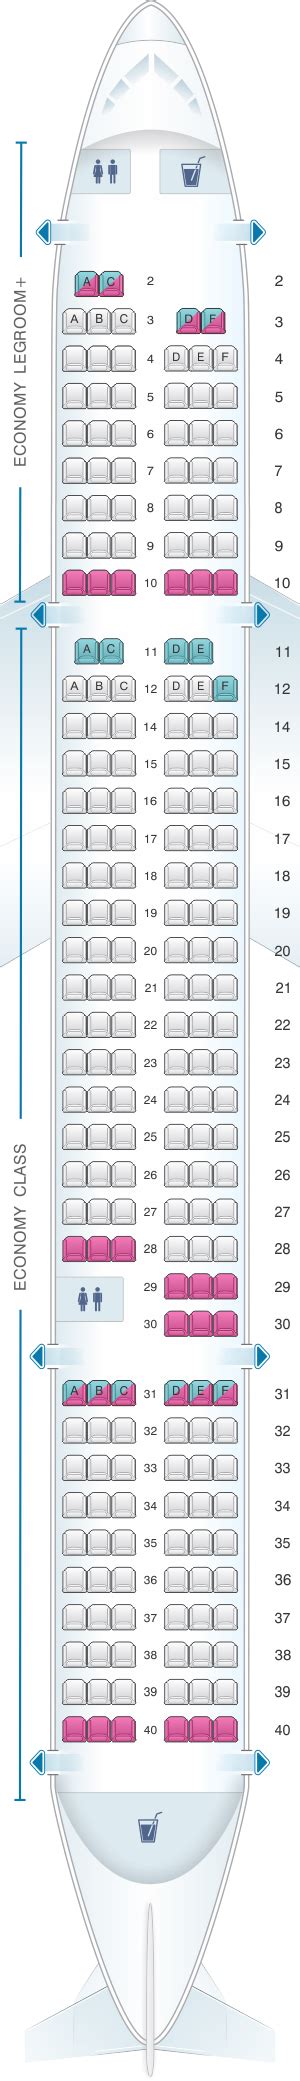 Seating chart allegiant airlines. Seat Maps; Allegiant Air Airbus A319 Seat Map; Seat 15f; Allegiant Air Reviews. Seating Charts. Airbus A319 · Airbus A320 · Boeing 757-200 · McDonnell Douglas MD-80 . Allegiant Air Airbus A319 Seat Reviews Show seat chart [1] Pro tips: this seat has extra legroom : no underseat stowage : 